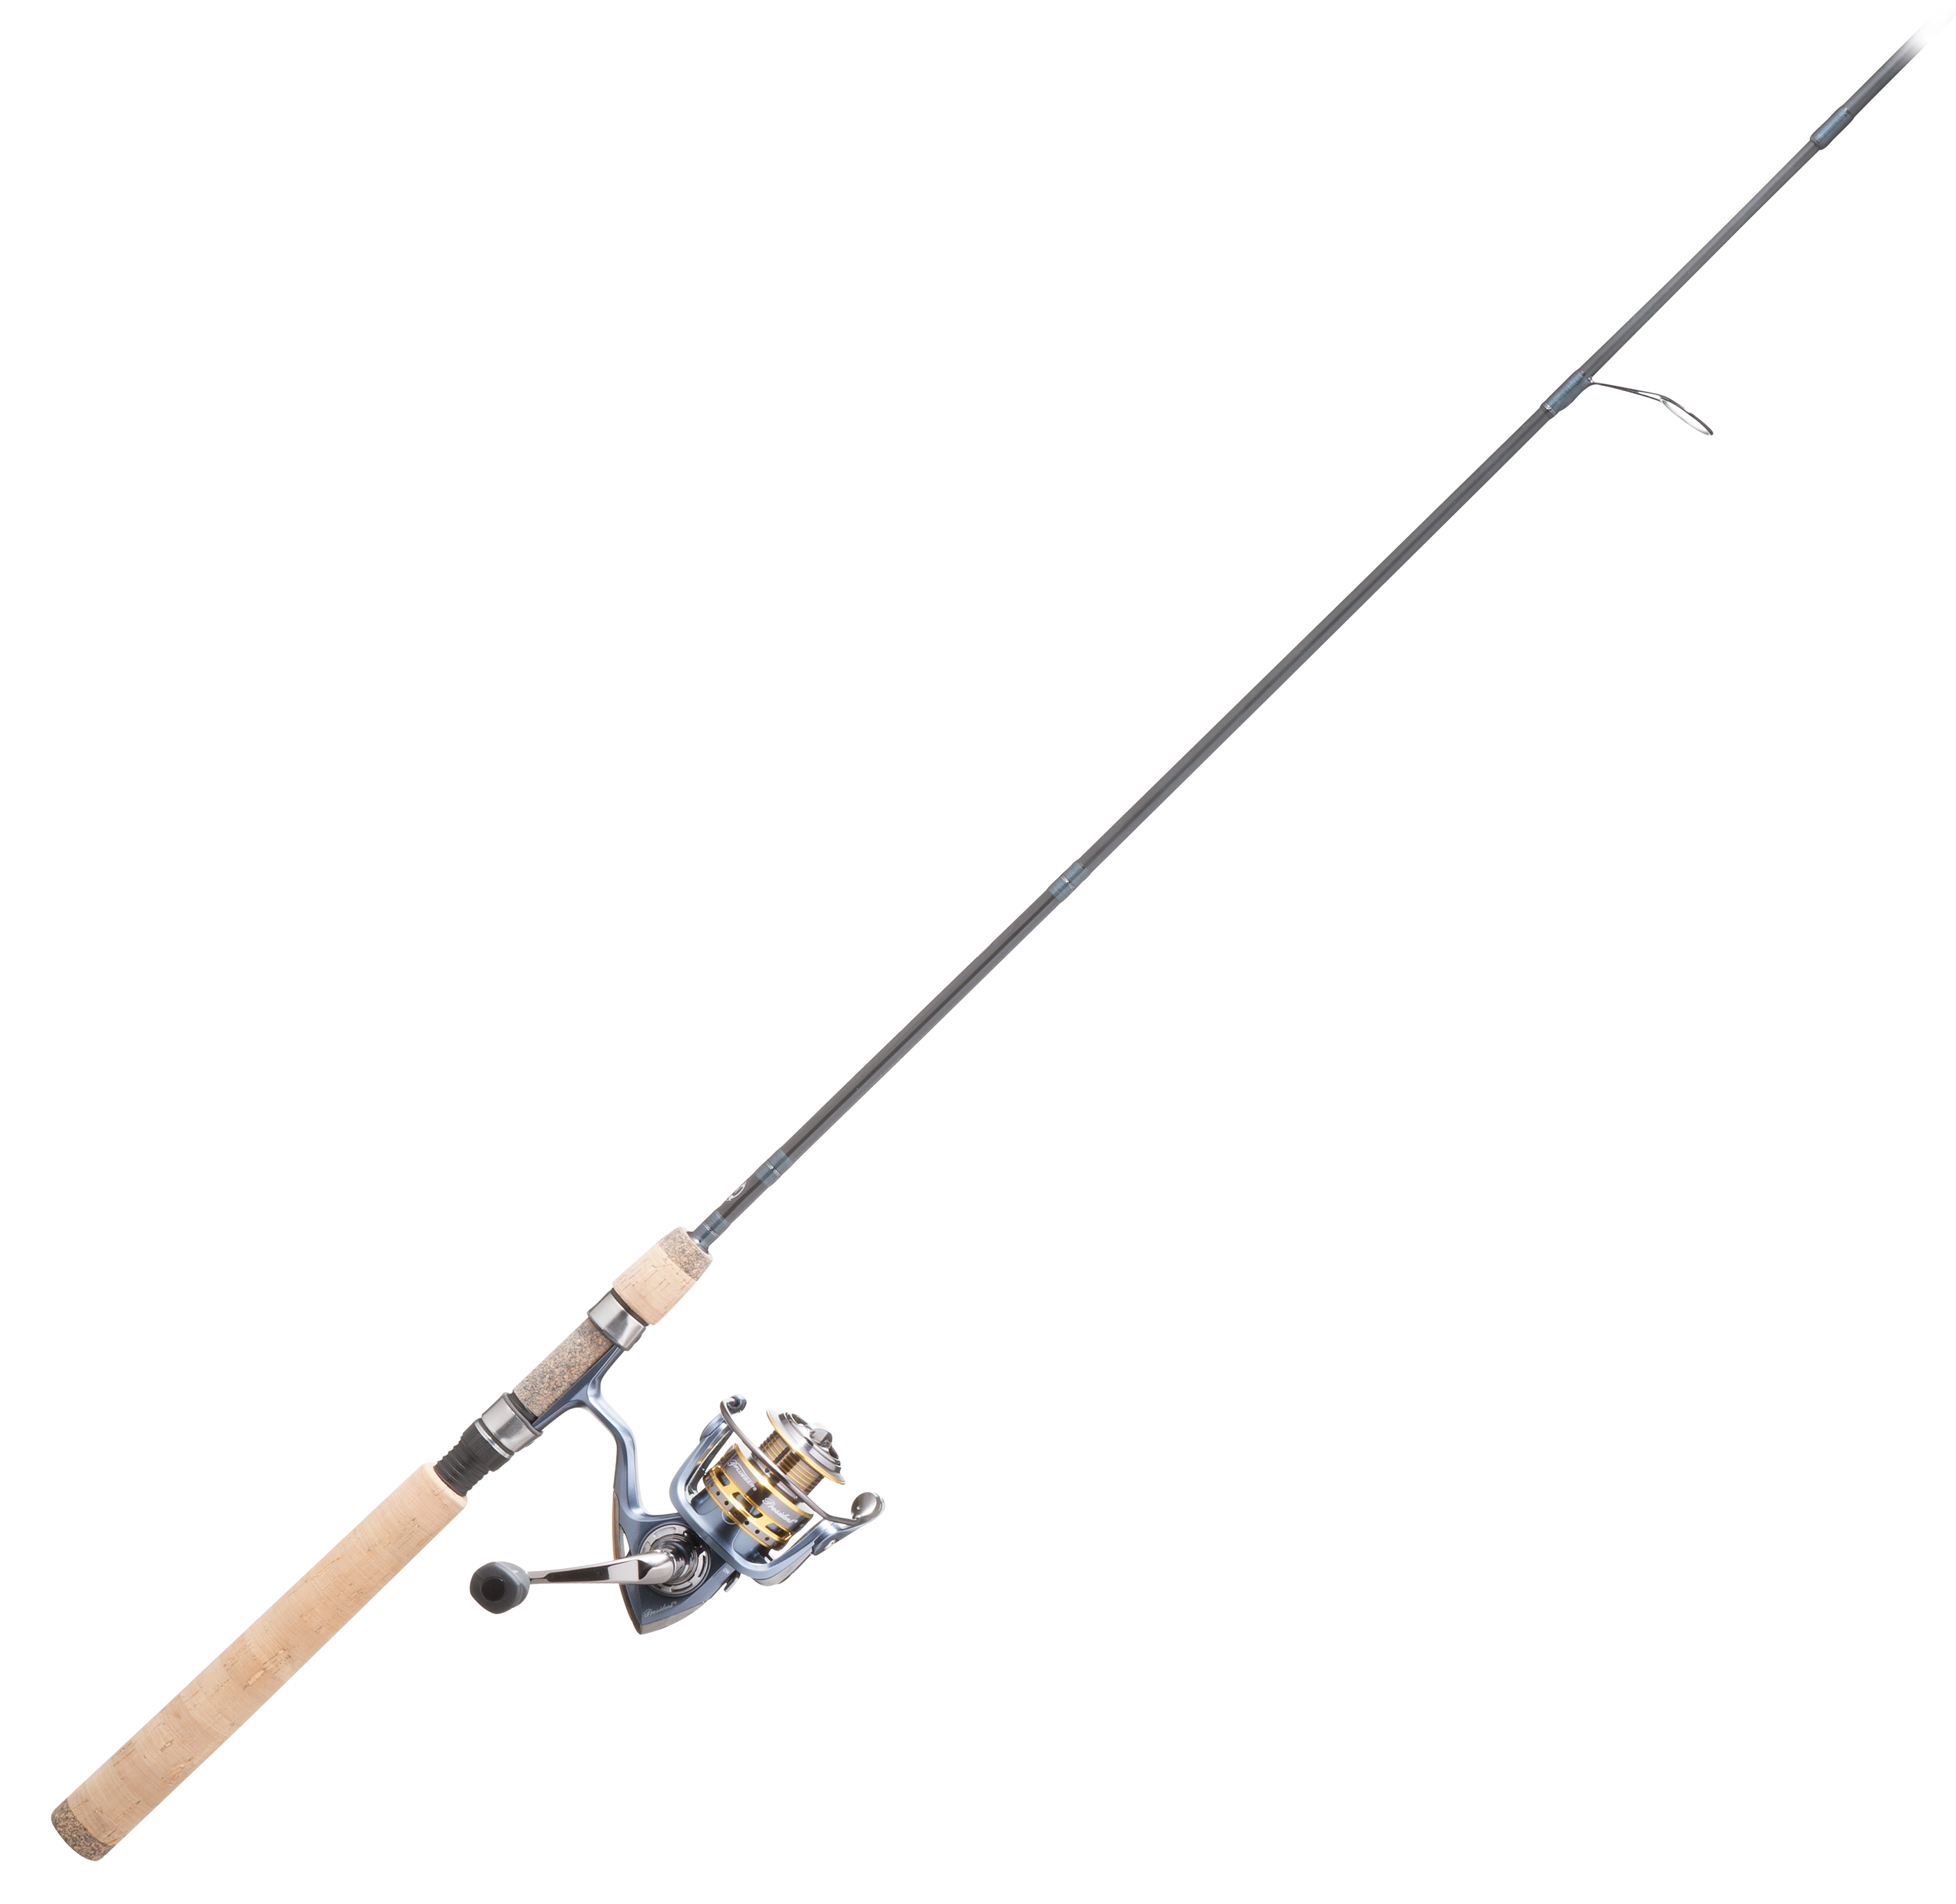 Pflueger President/Bass Pro Shops Micro Lite Spinning Rod and Reel